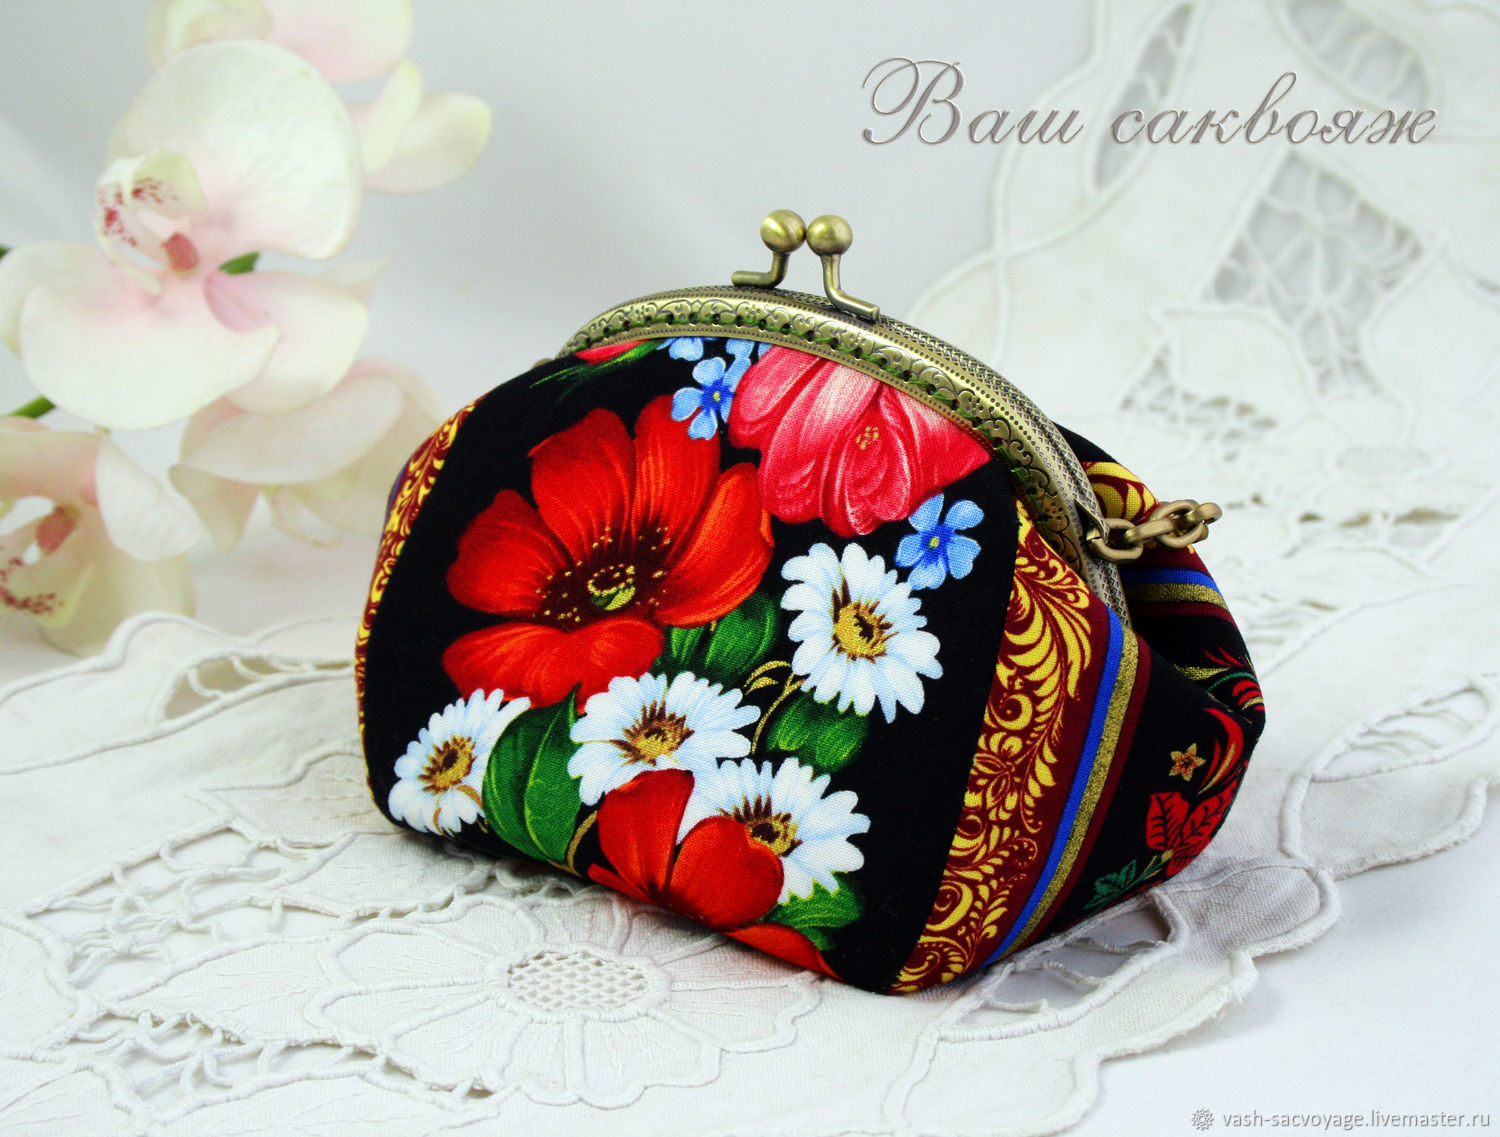 04a61f98530f07315172d224d2nd--sewn-cosmetic-bag-with-clasp-cosmetic-bag-russian-flowers-mad.jpg